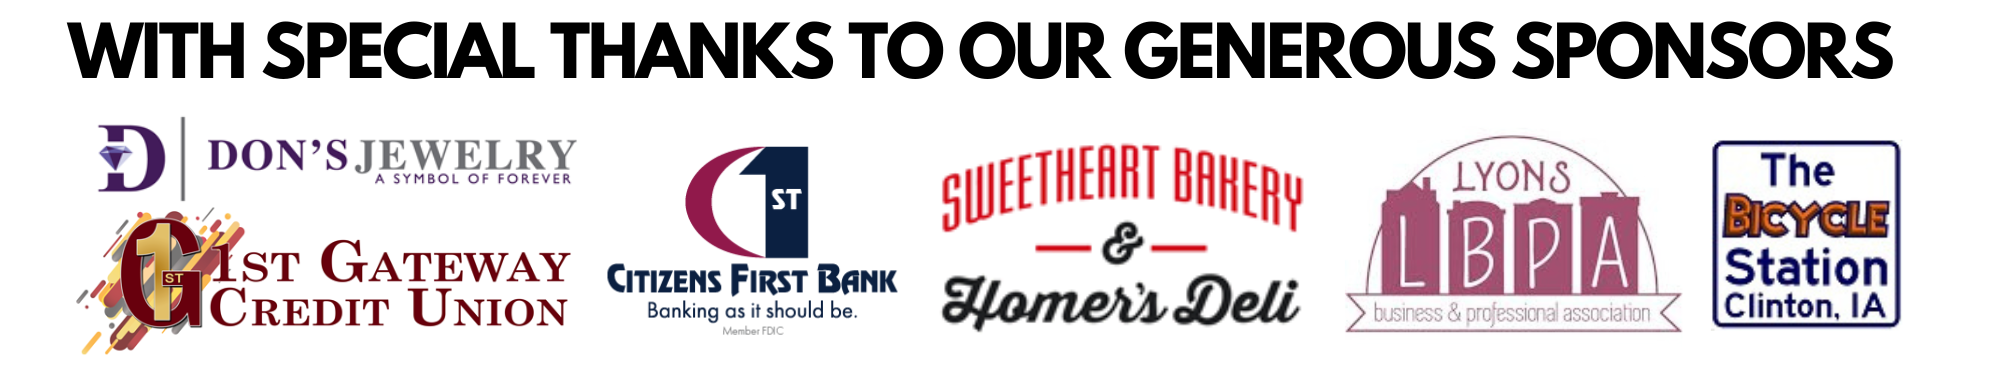 Special thanks to our generous sponsors! Don's Jewelry, 1st Gateway Credit Union, Citizens First Bank, Homer's Deli And Sweetheart Bakery, LBPA: Lyons Business & Professional Association, and The Bicycle Station